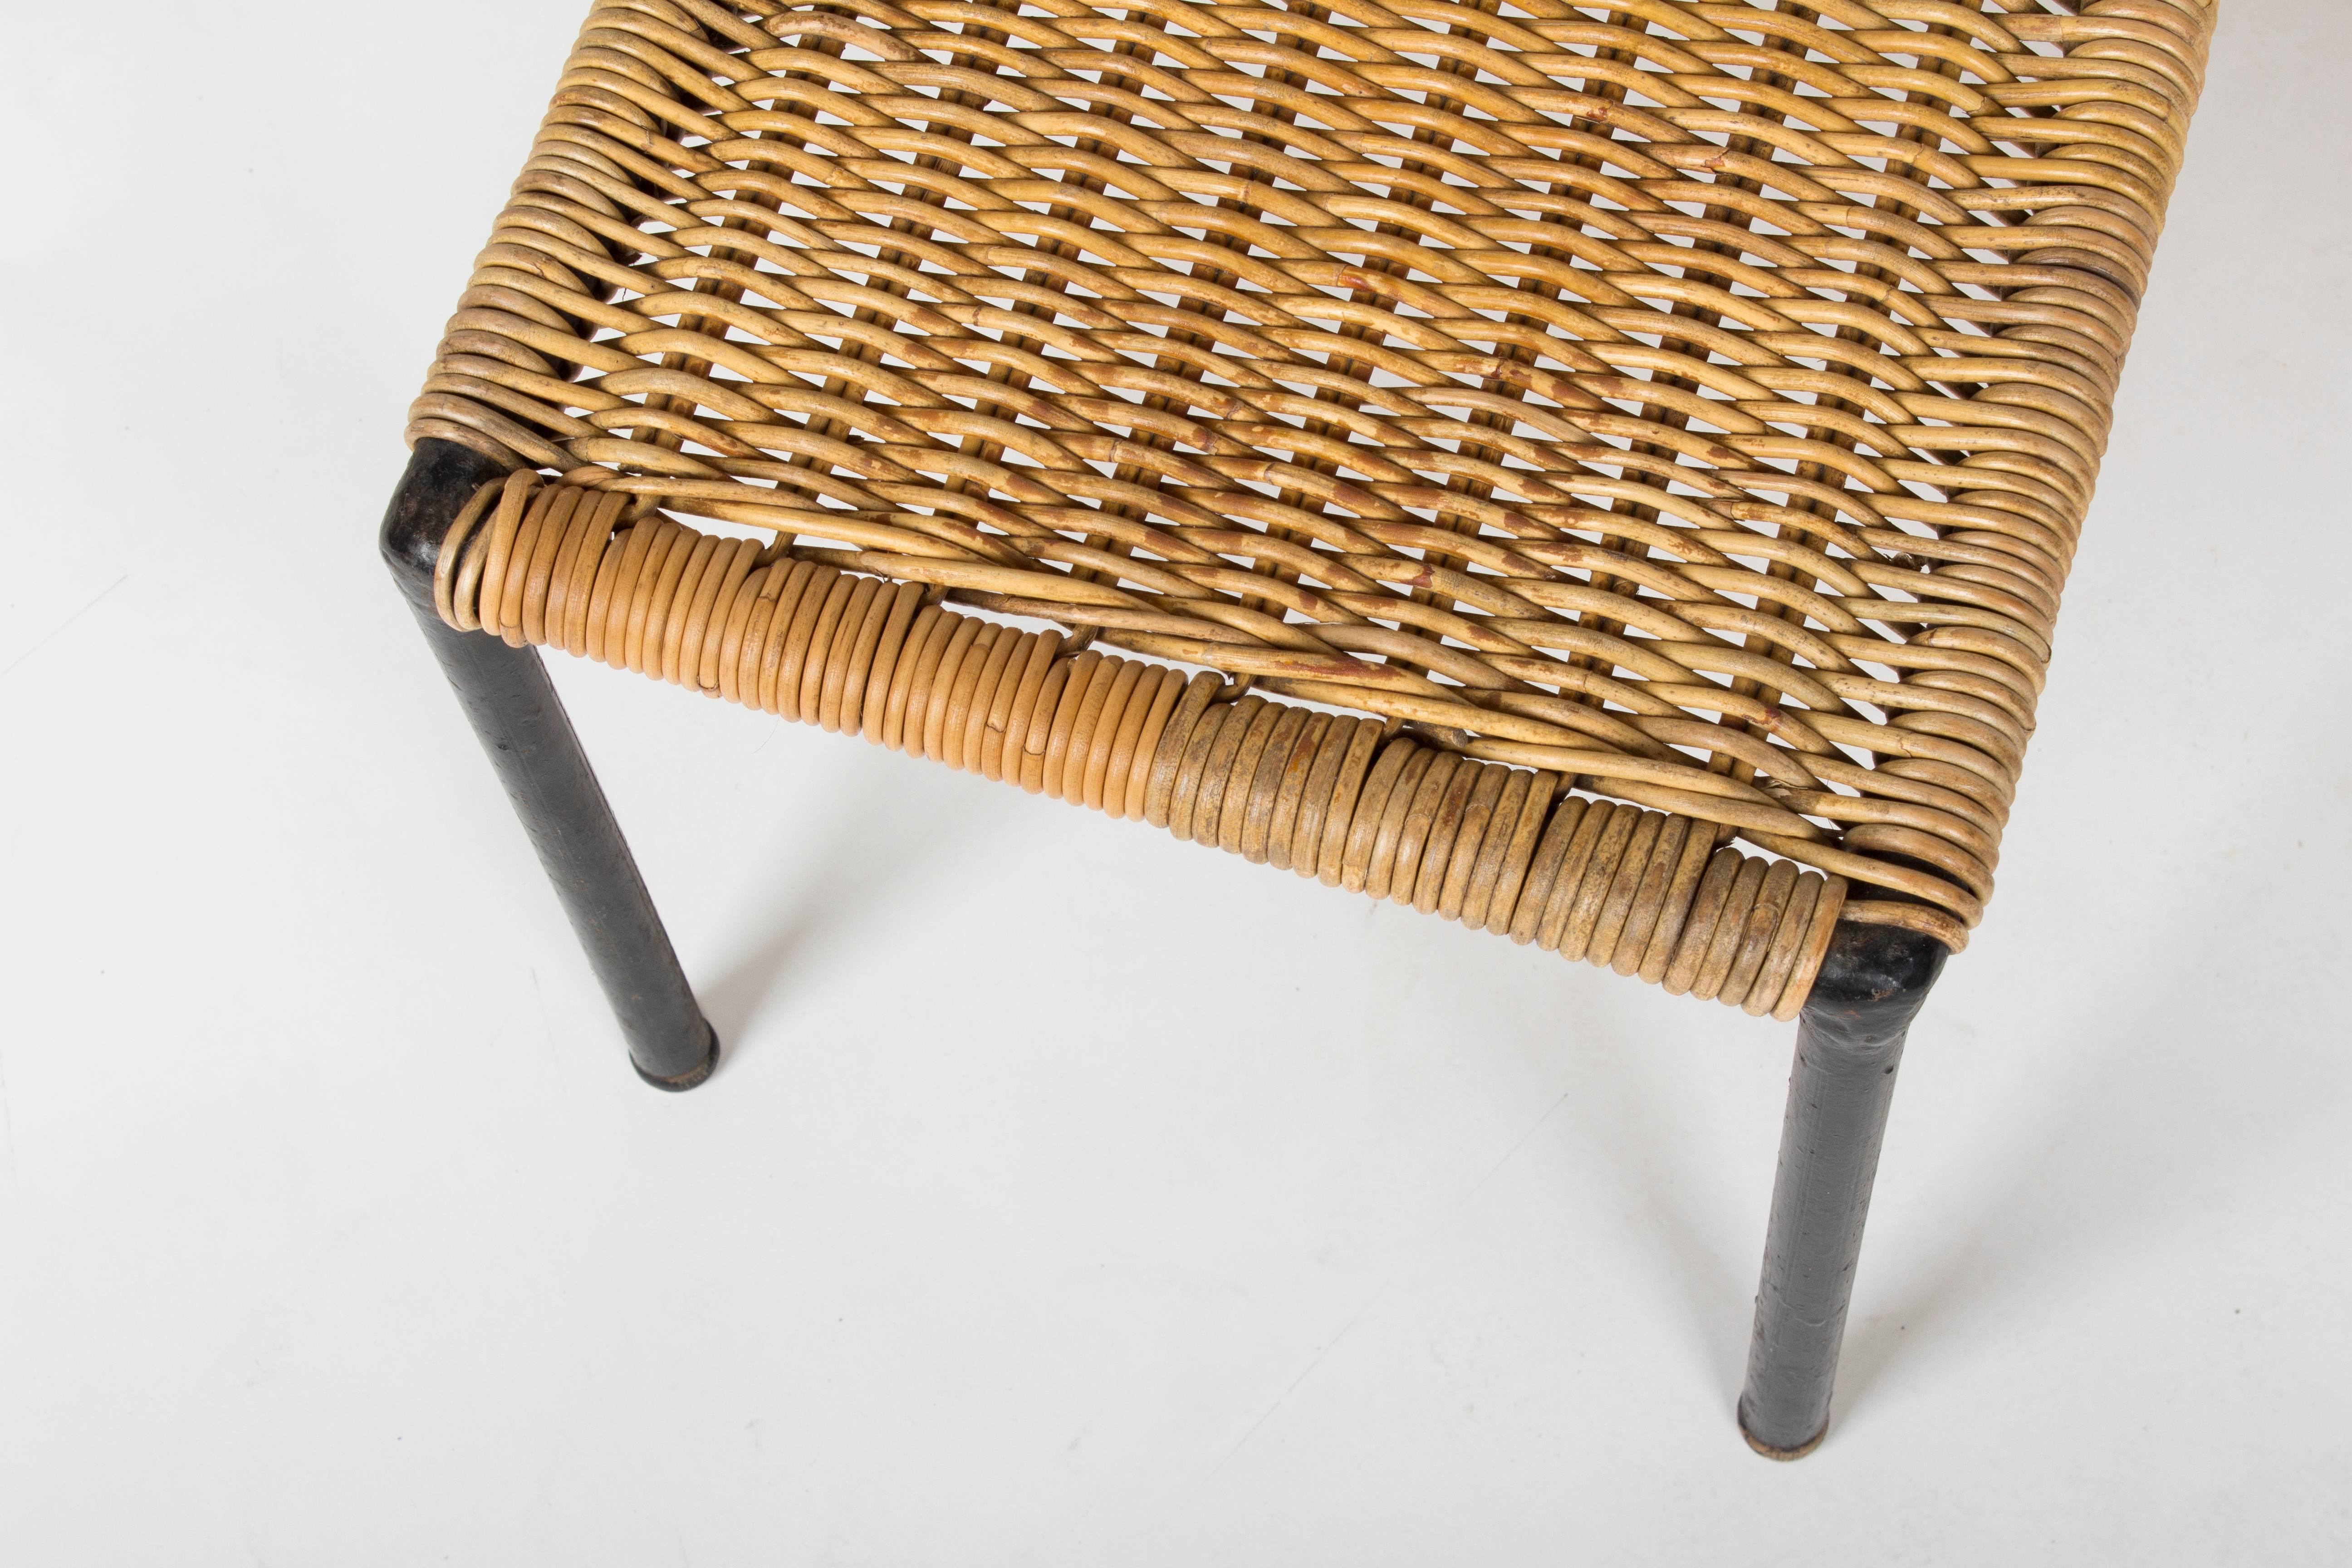 Blackened Rare Pair of Early Auböck Wicker Side Tables, Vienna, 1950s For Sale